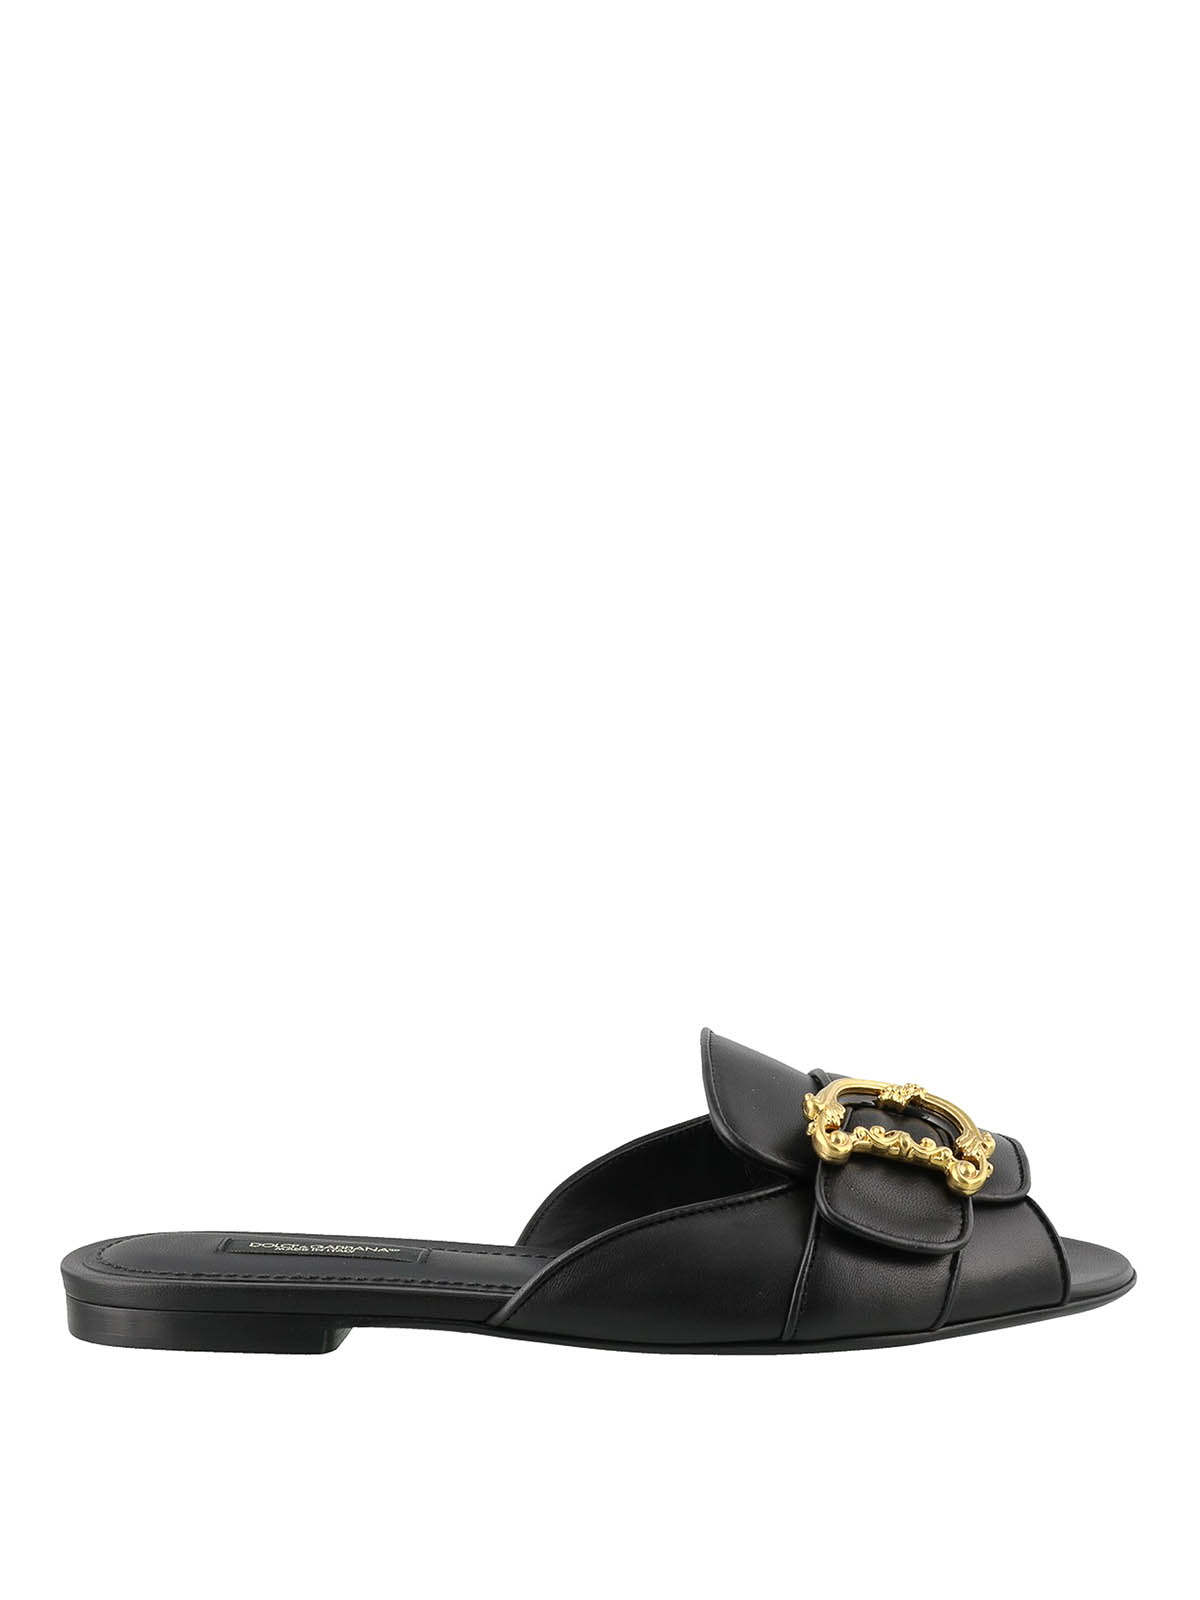 DOLCE & GABBANA LEATHER SANDALS WITH BAROQUE DG LOGO